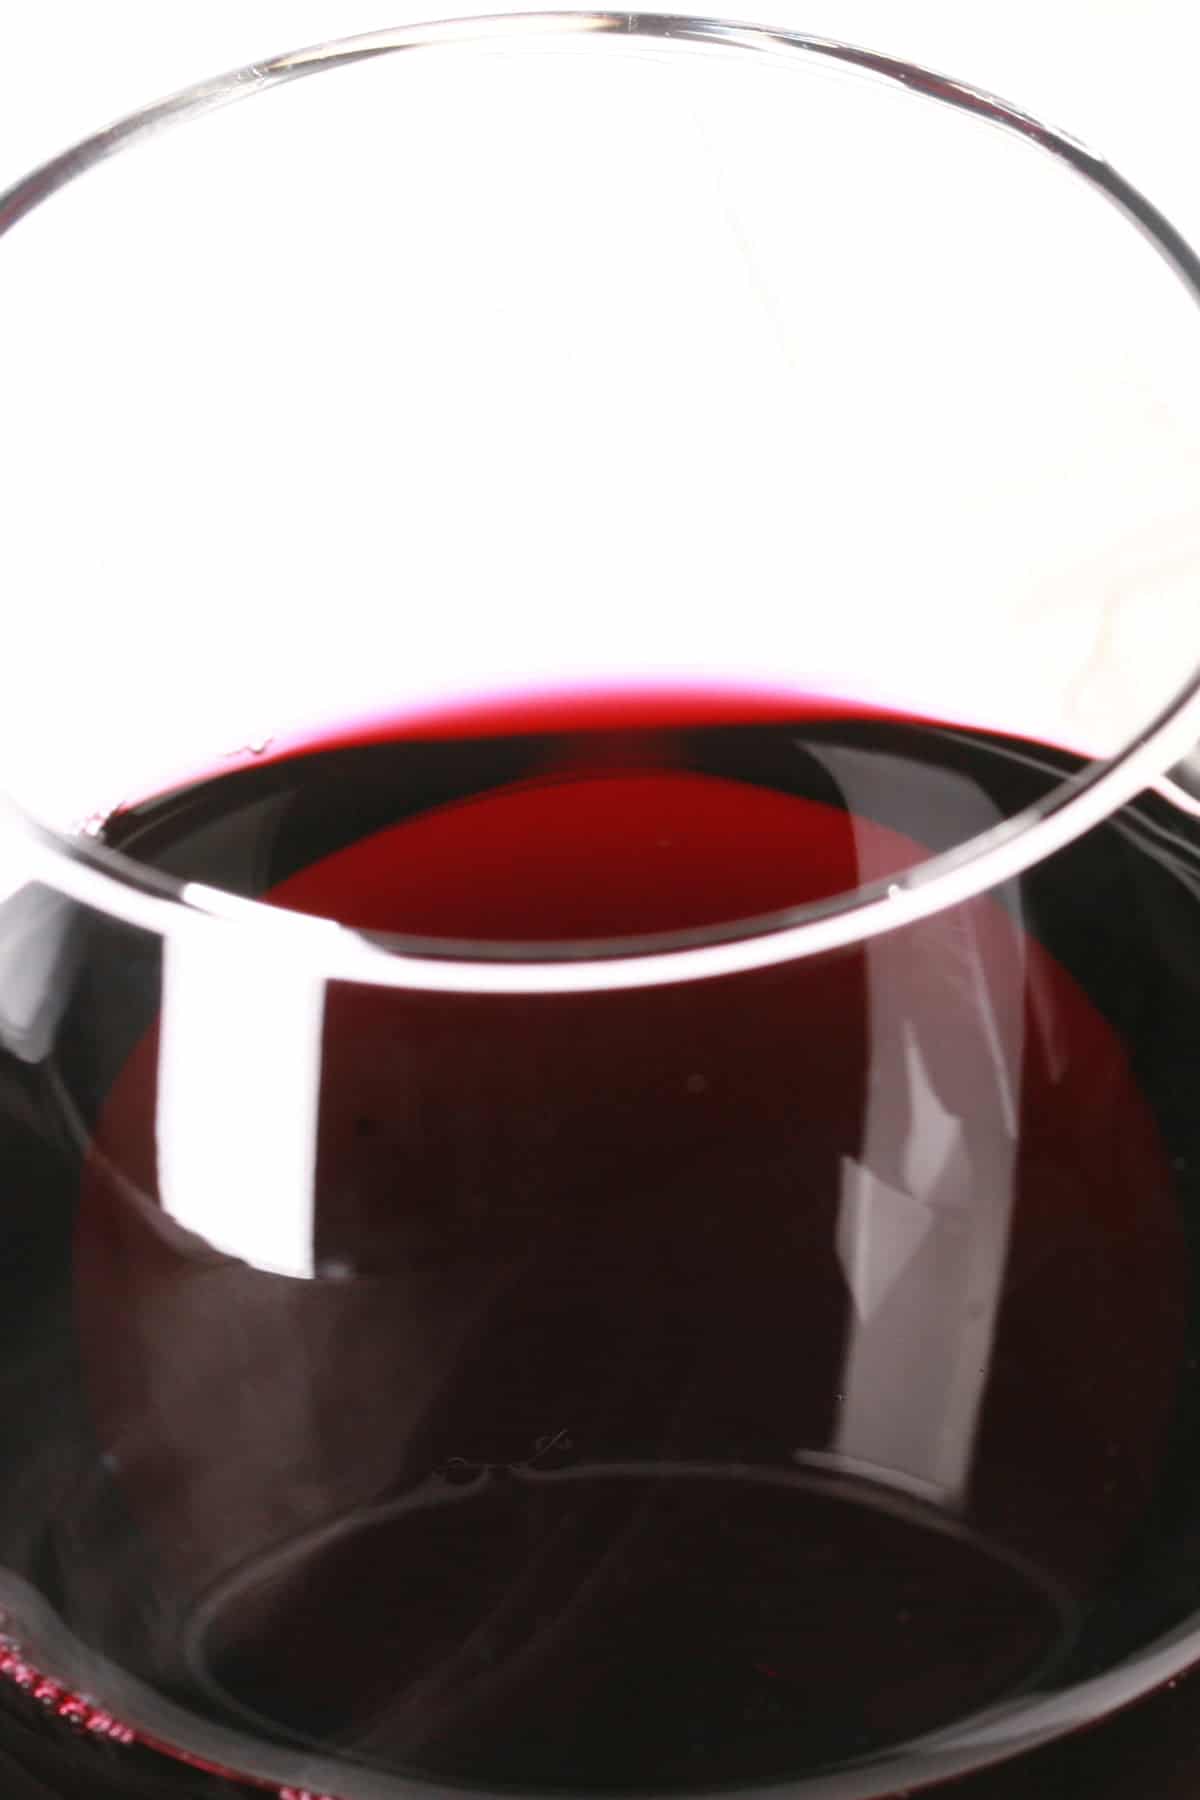 A very close up view of a dark purple wine, in a glass.